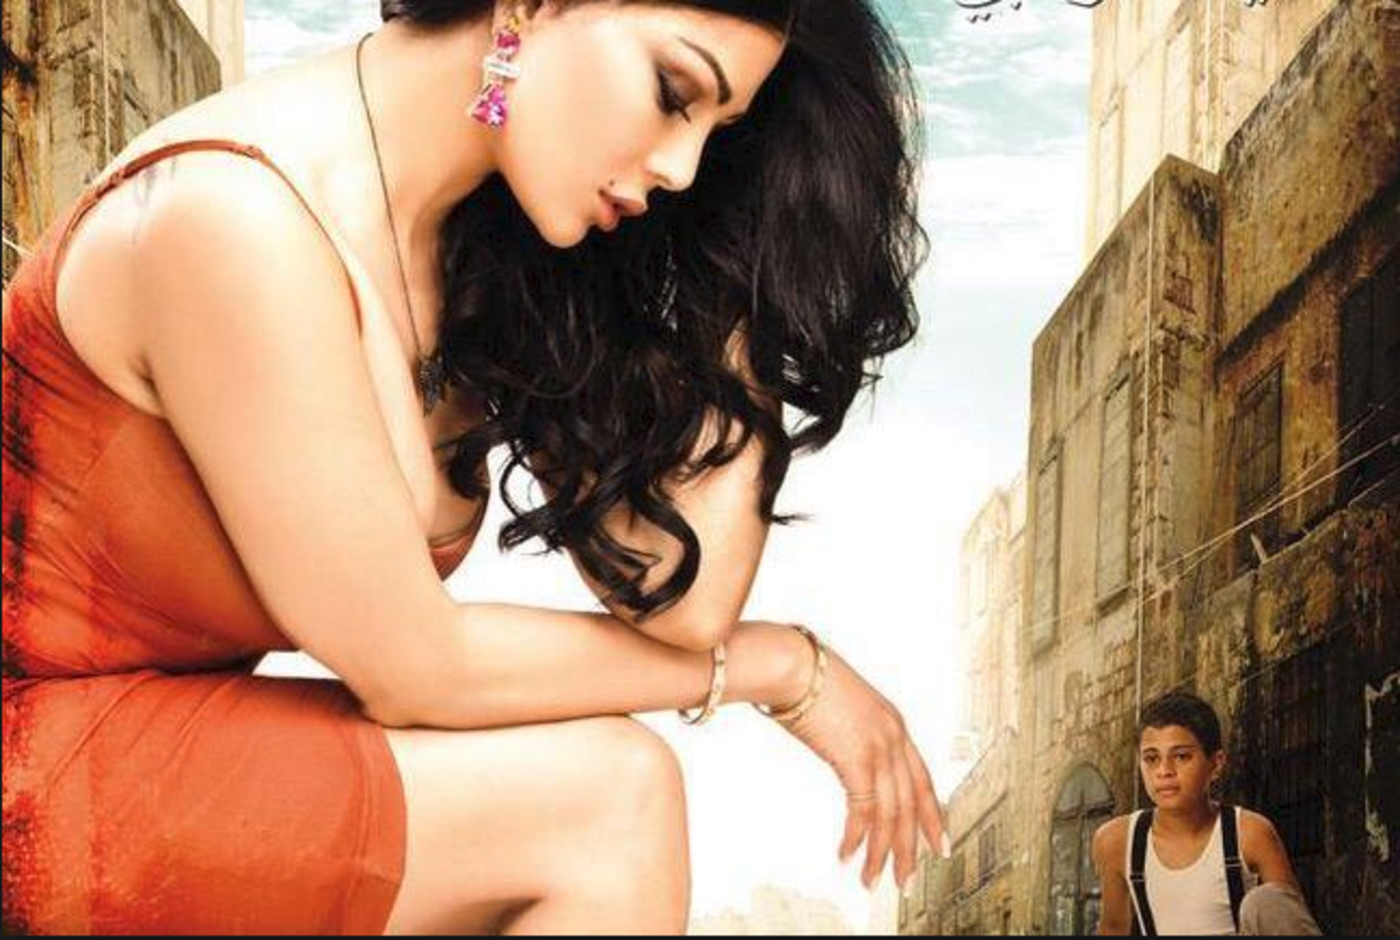 Lebanese star's movie pulled from Egyptian screens | Middle East Eye